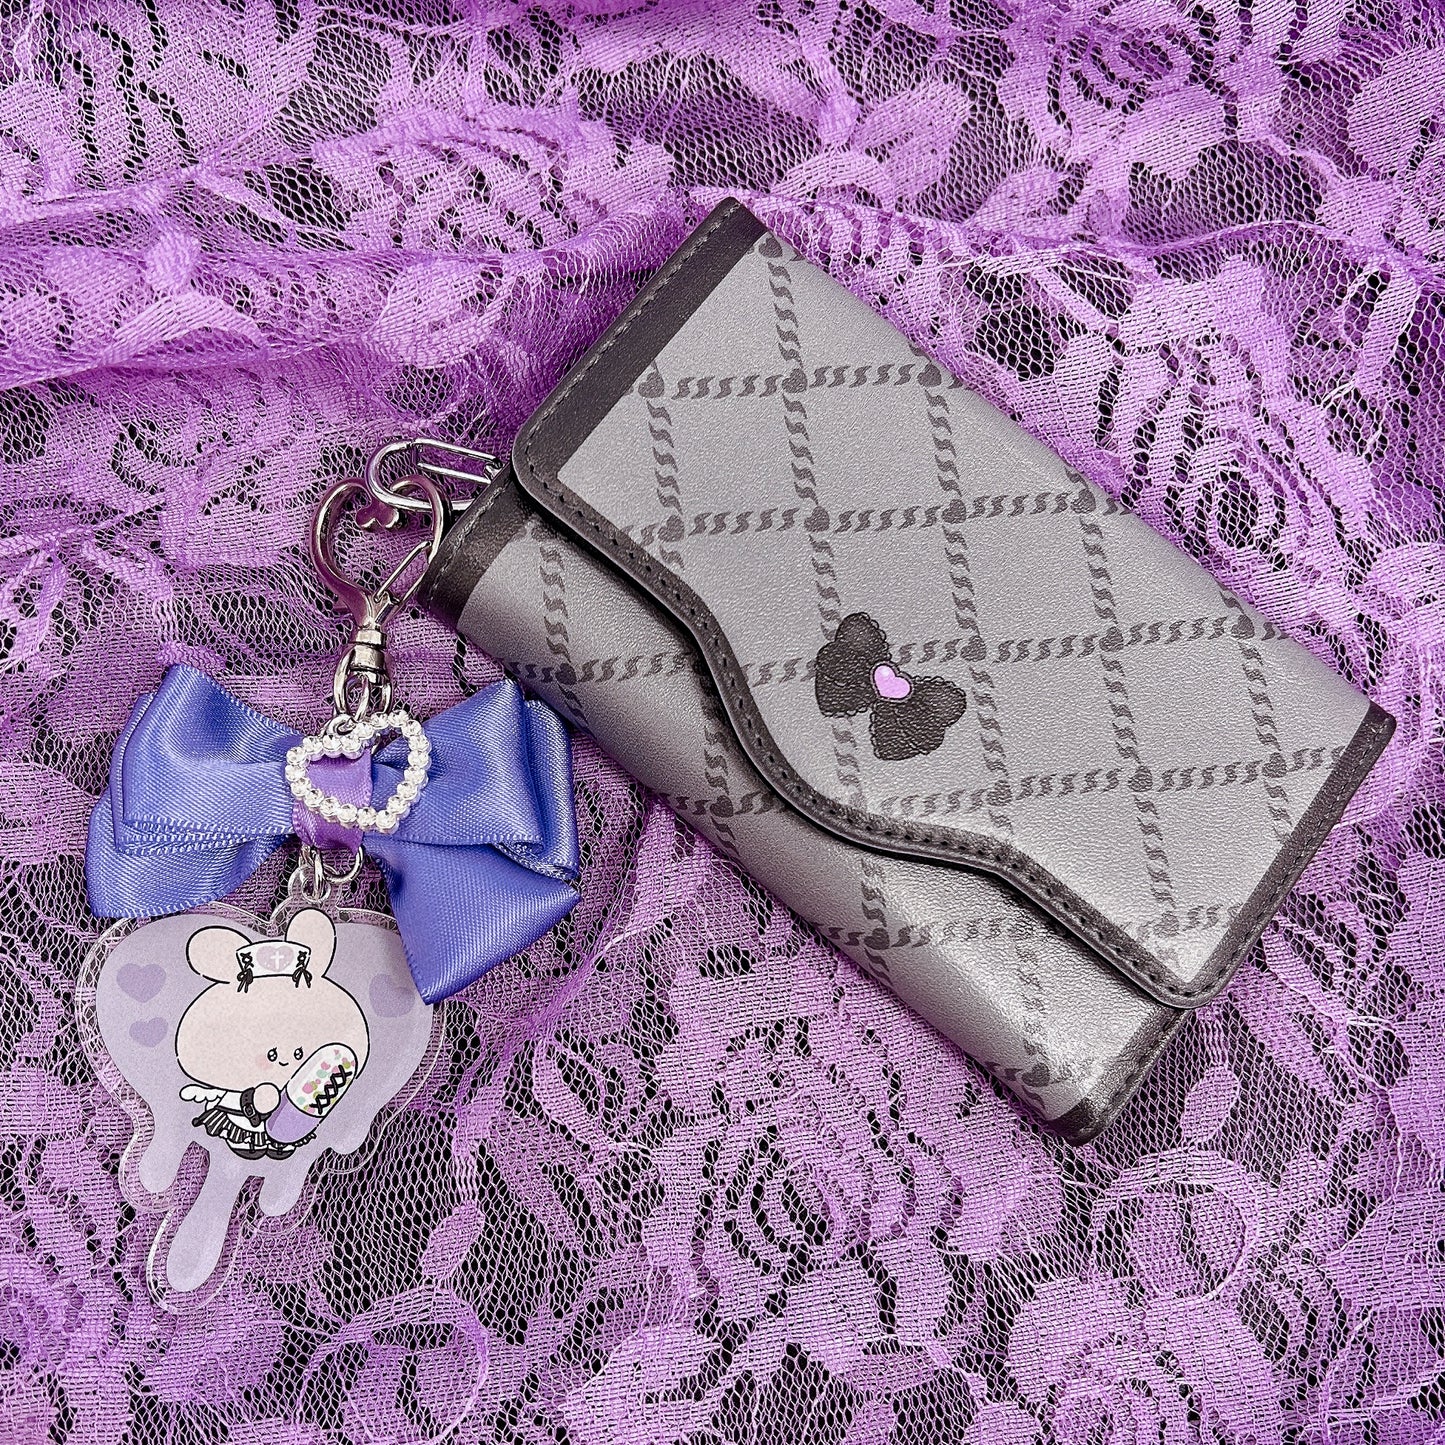 [Asamimi-chan] Key case [Made to order]